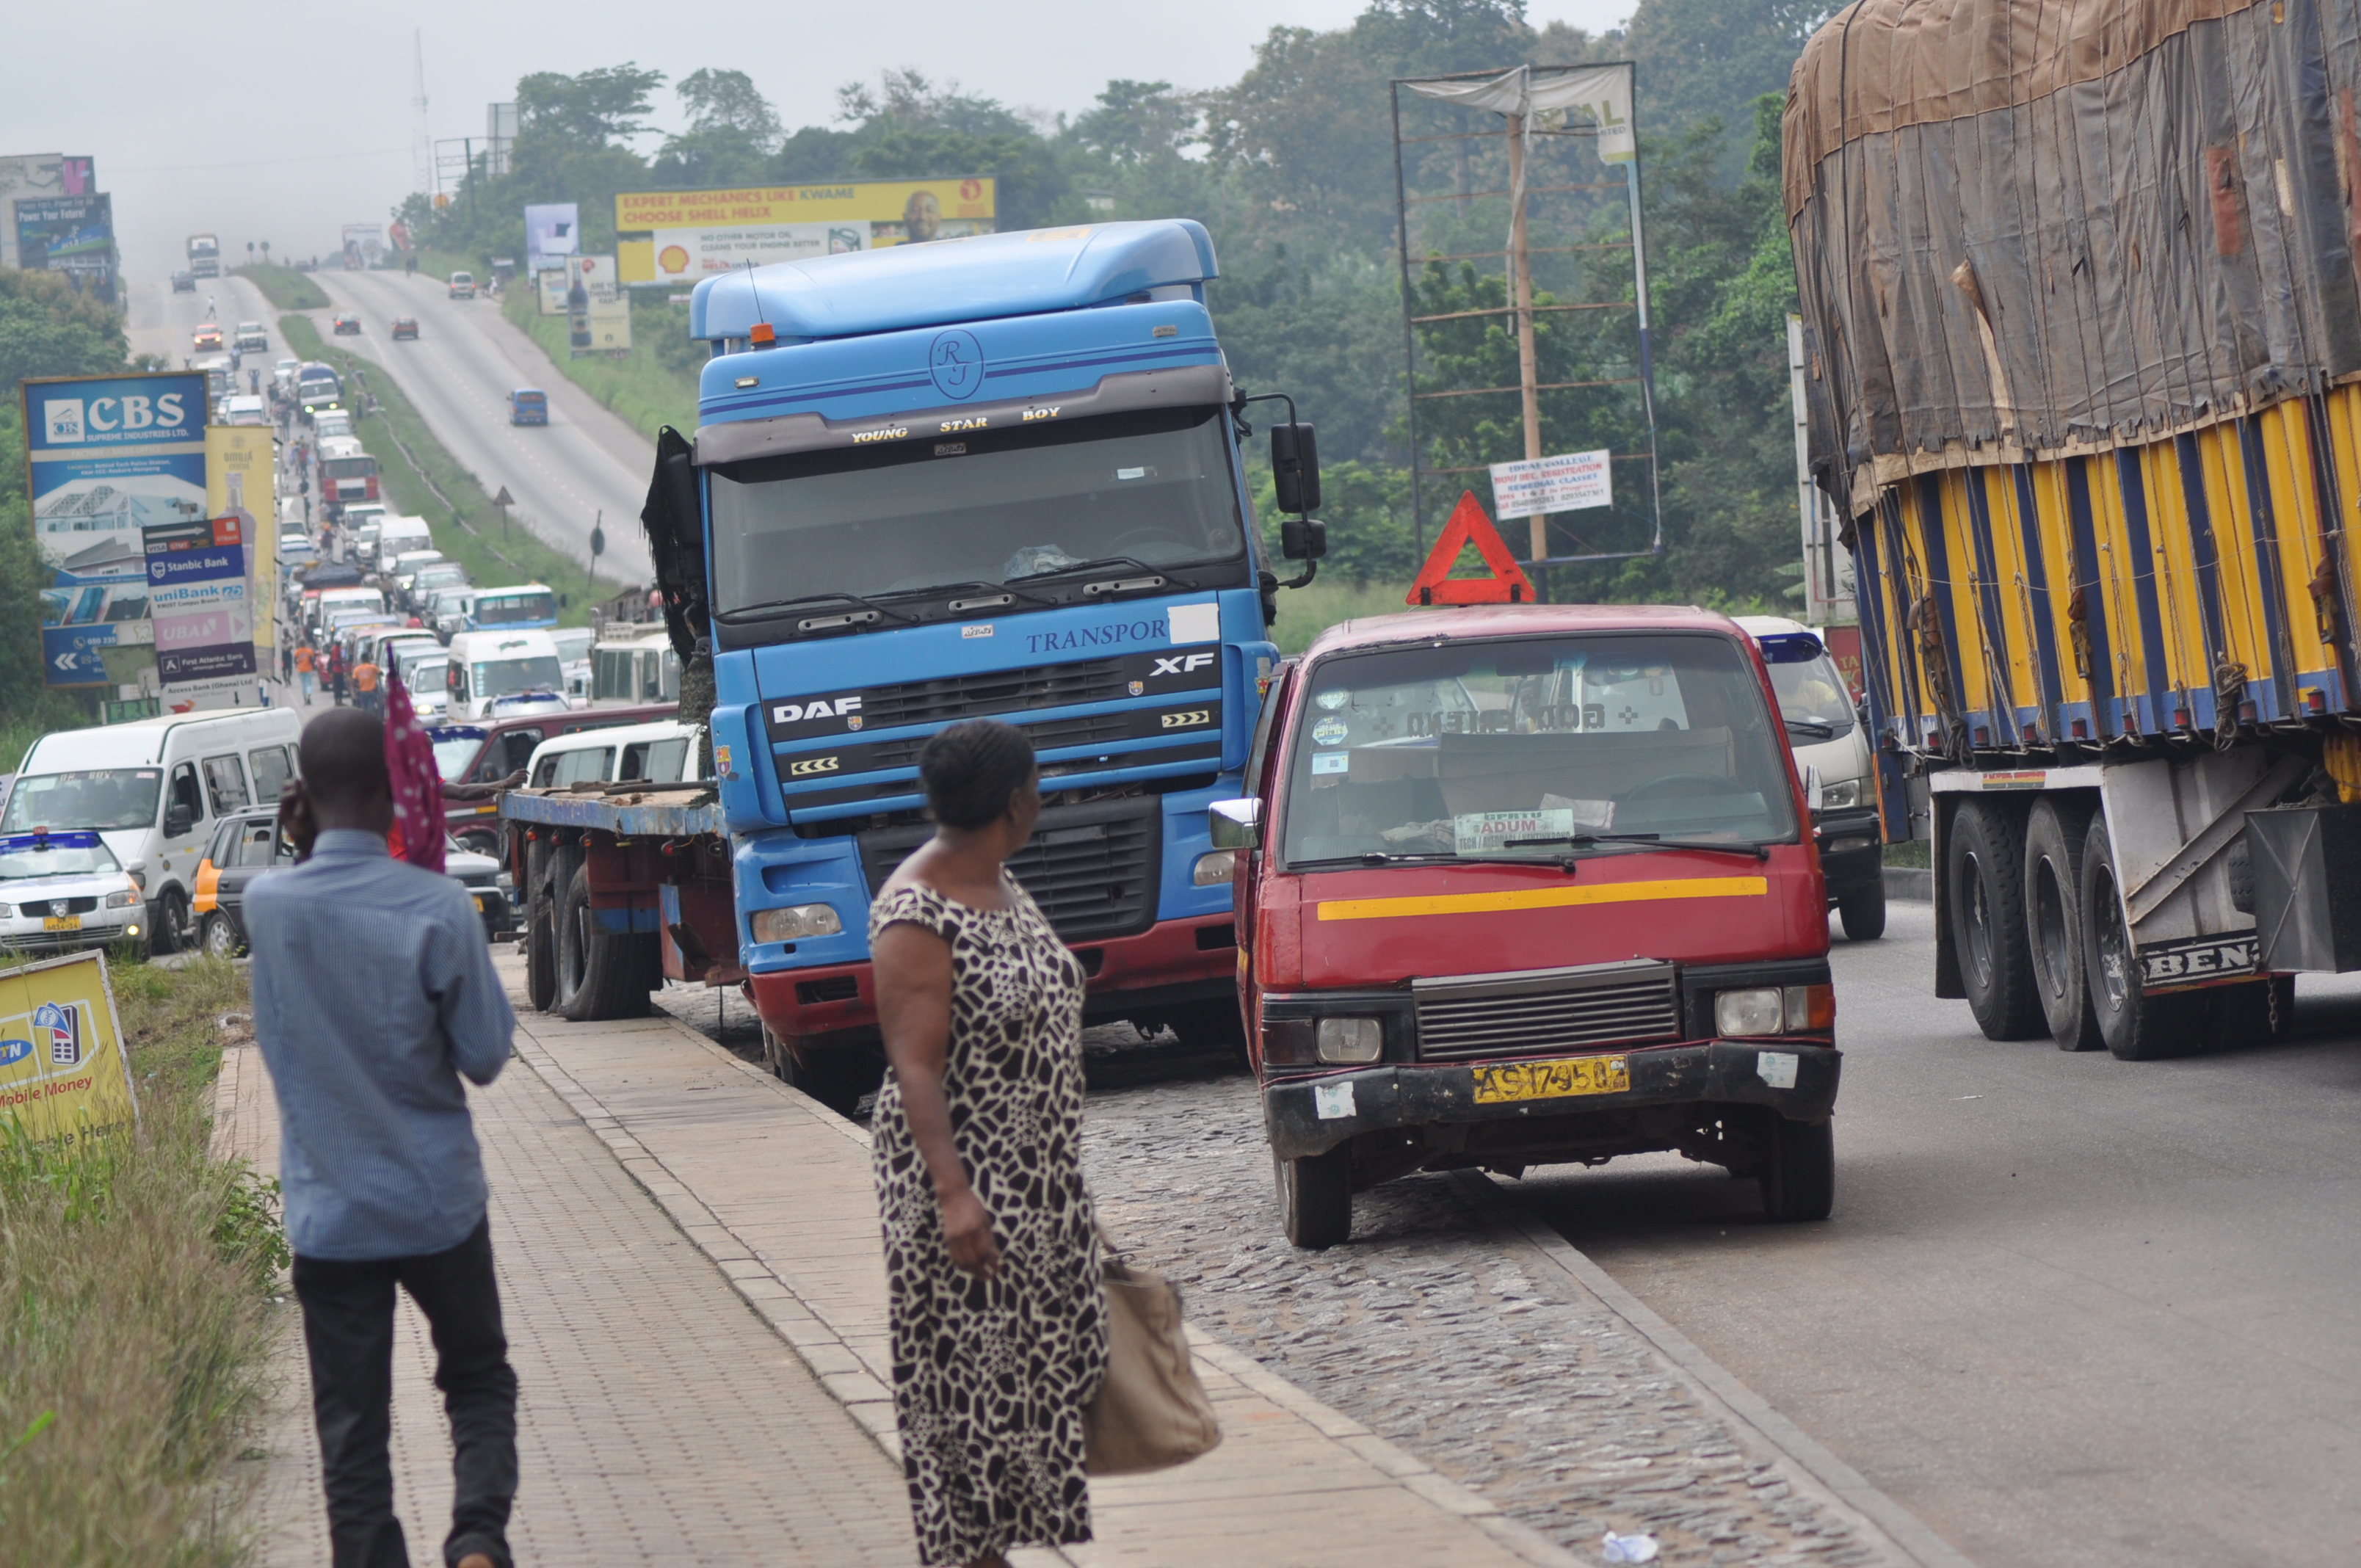 The police controlling traffic  jam on the Kumasi -Accra highway , as a result of an abandoned broken down vehicle